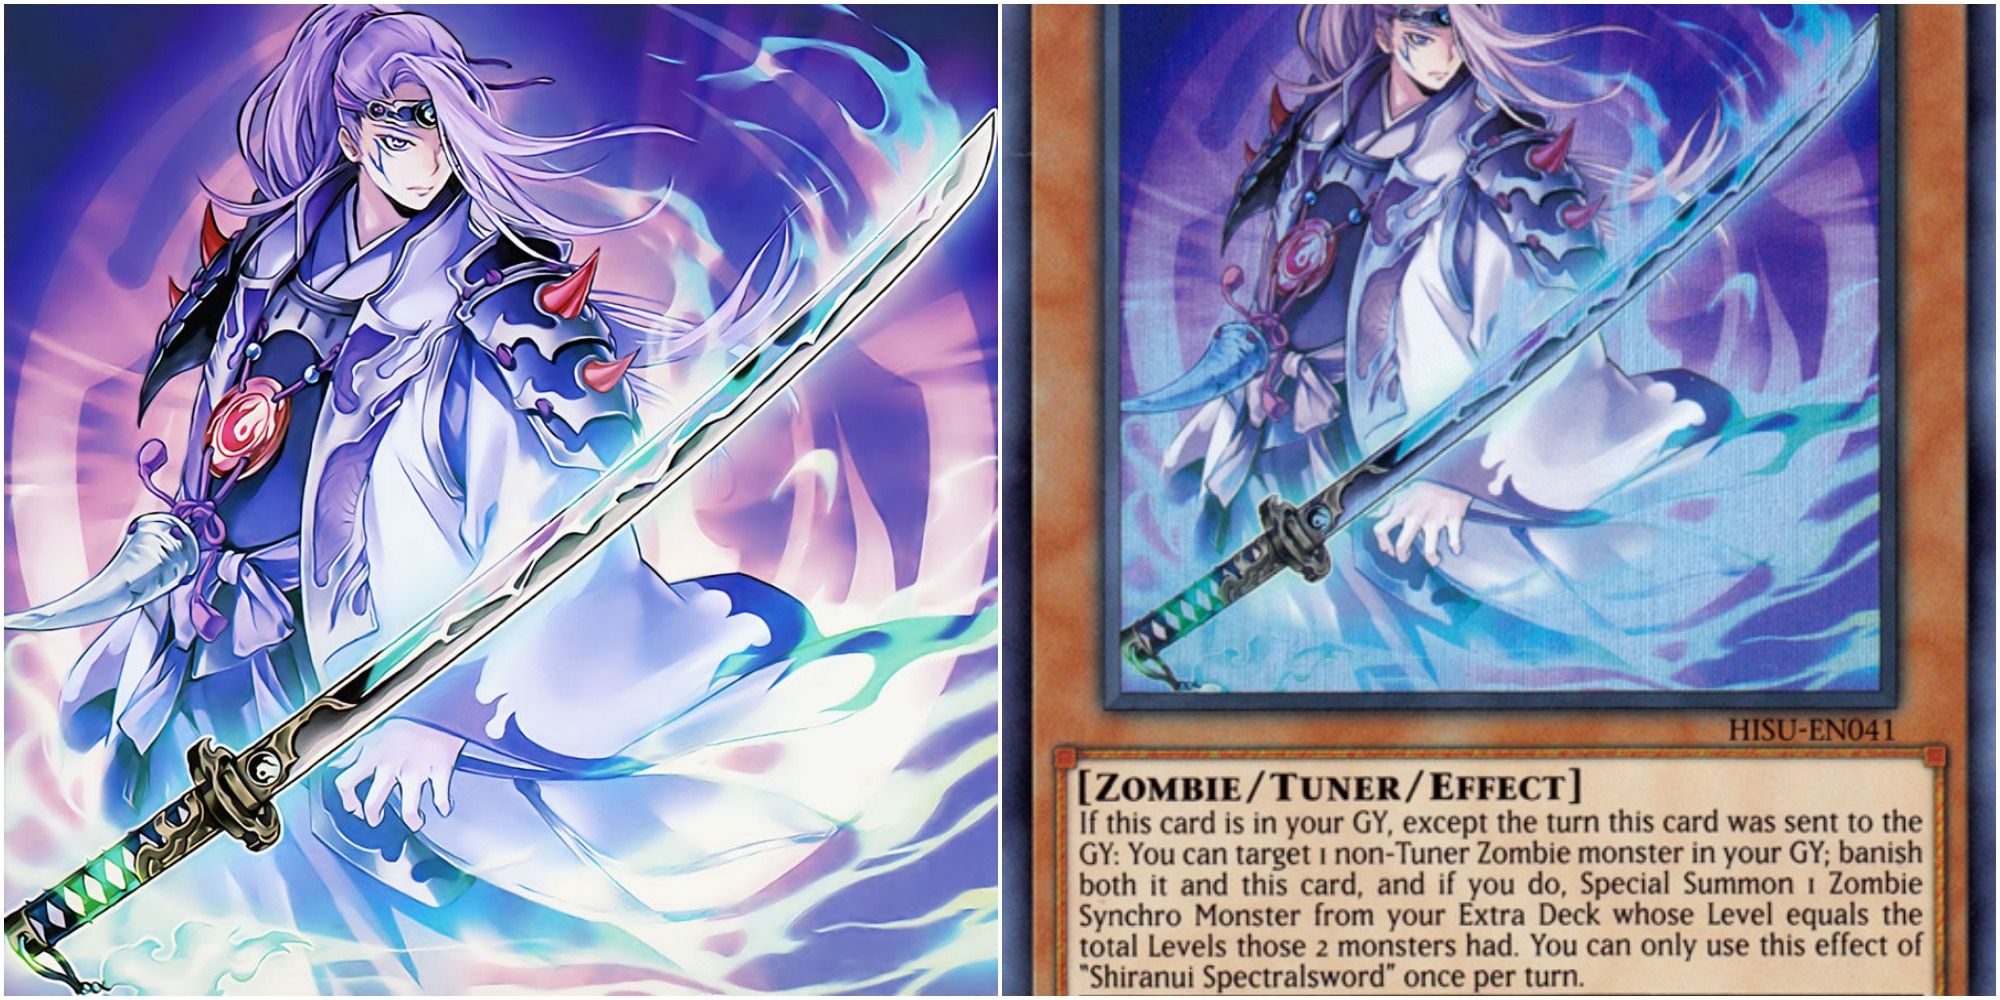 Shiranui Spectralsword card art and text